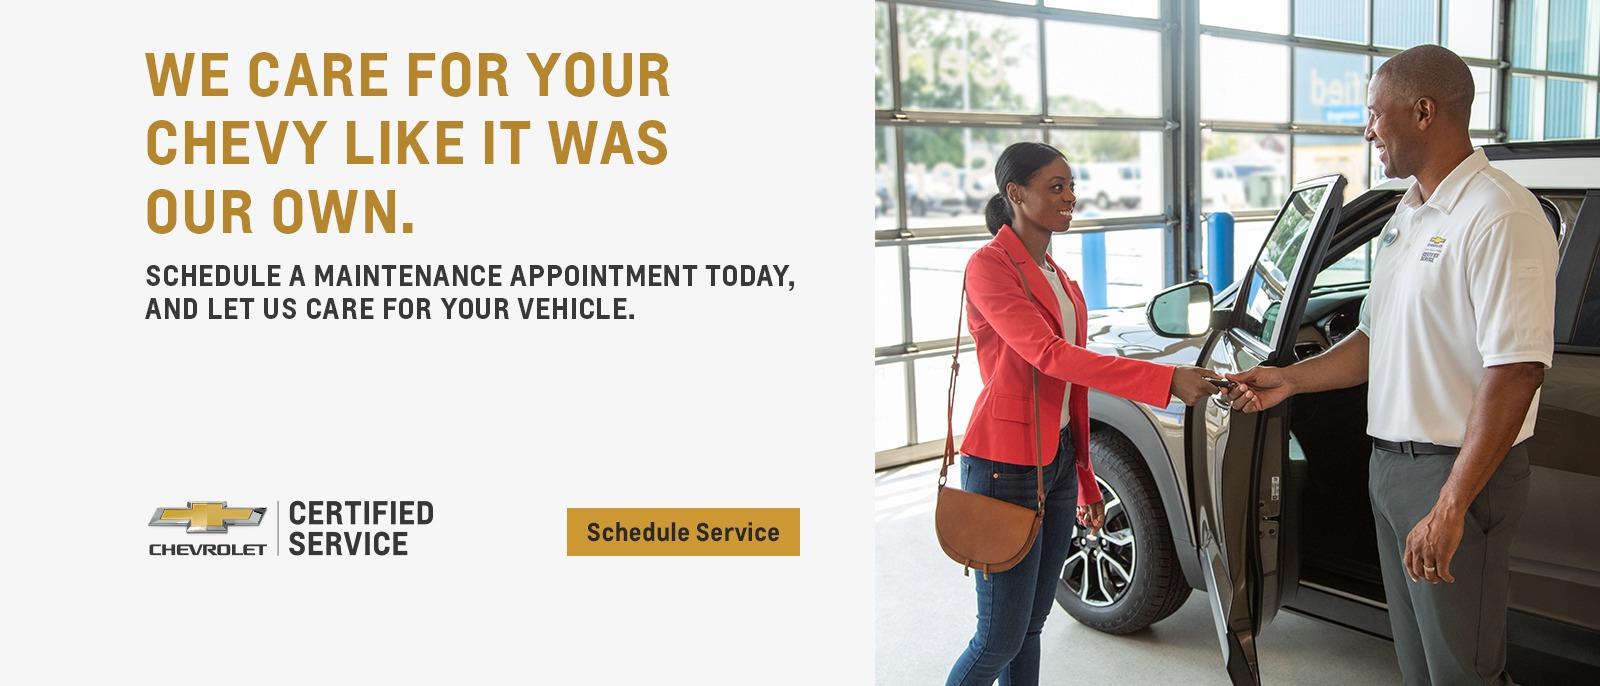 Schedule a maintenance appointment today